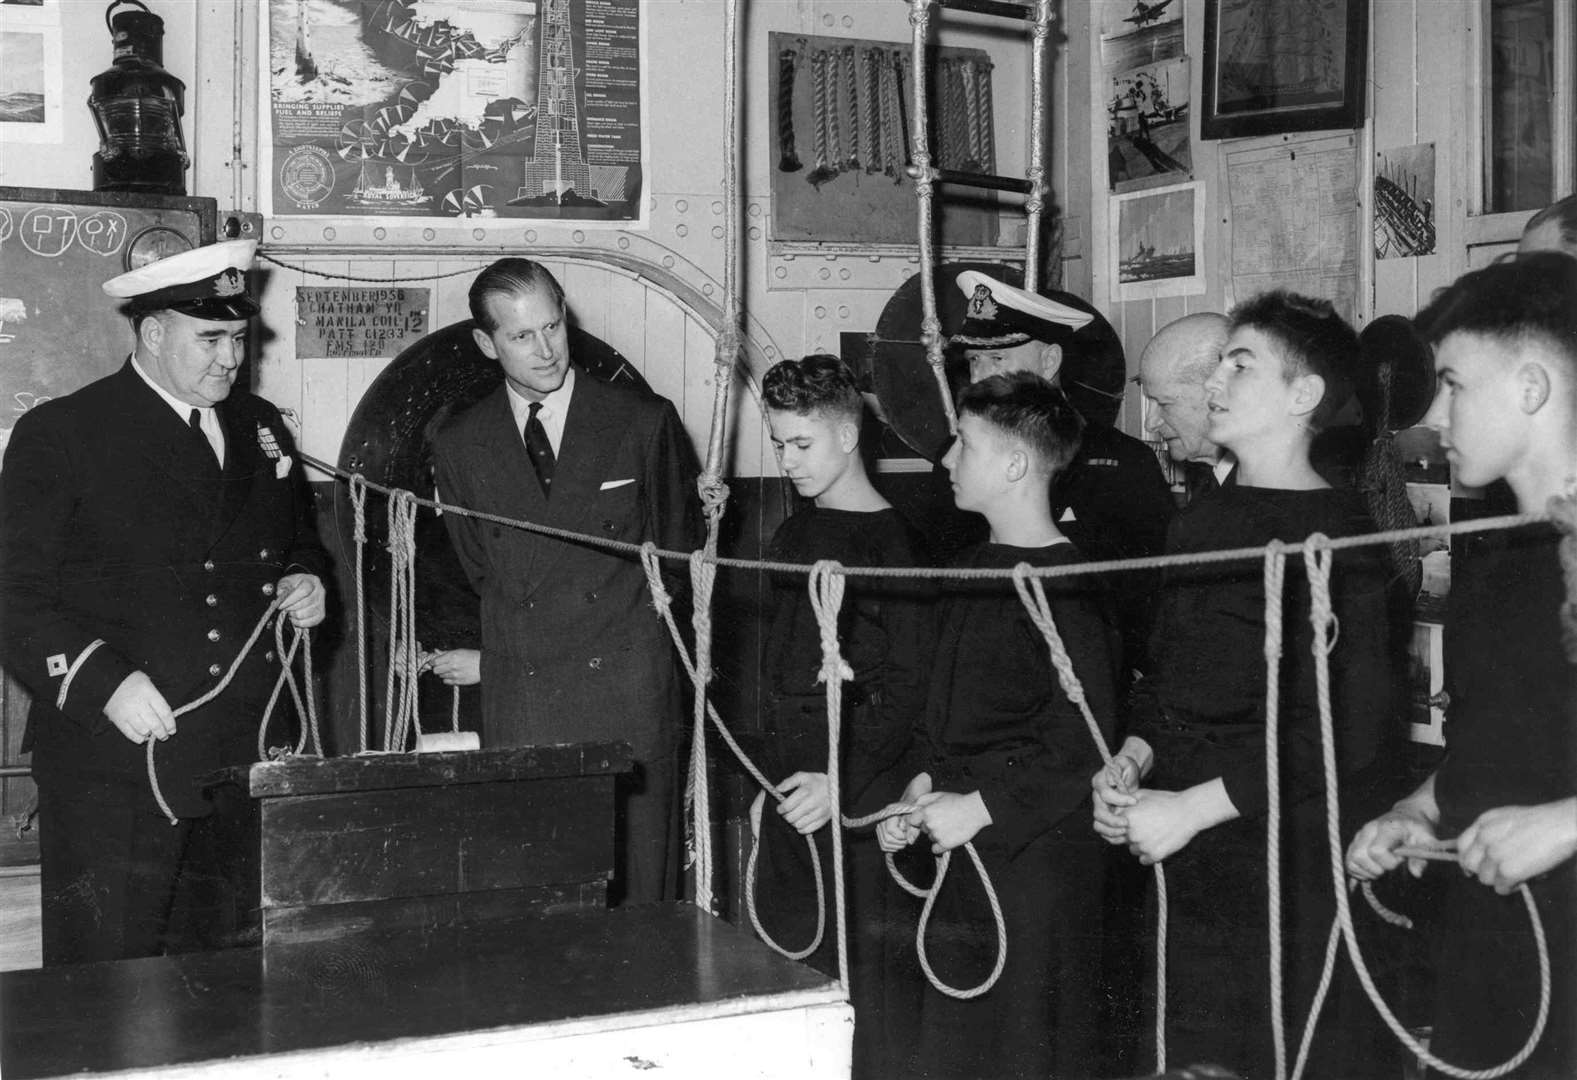 These boys demonstrated their knot-tying skills when the Duke of Edinburgh visited the training ship, Arethusa, at Upnor, near Rochester, in November 1960